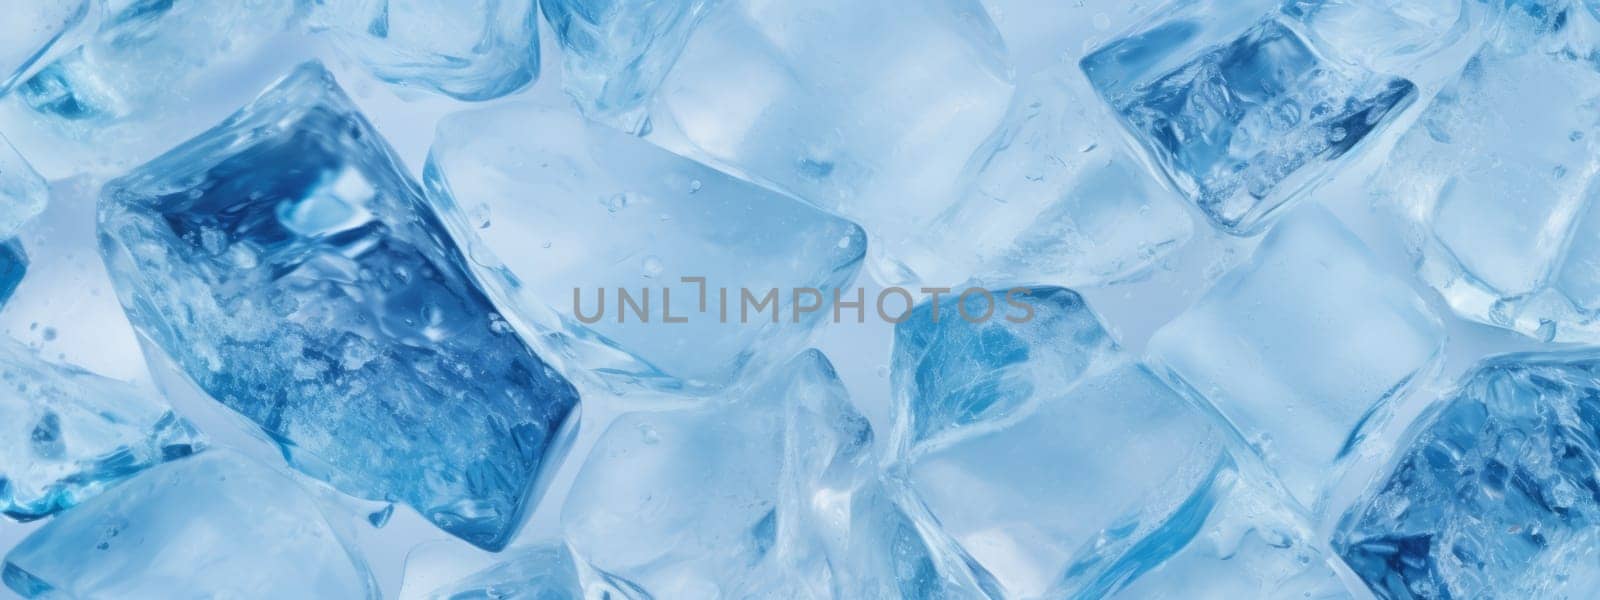 Crystal clear ice cubes seamless pattern texture background